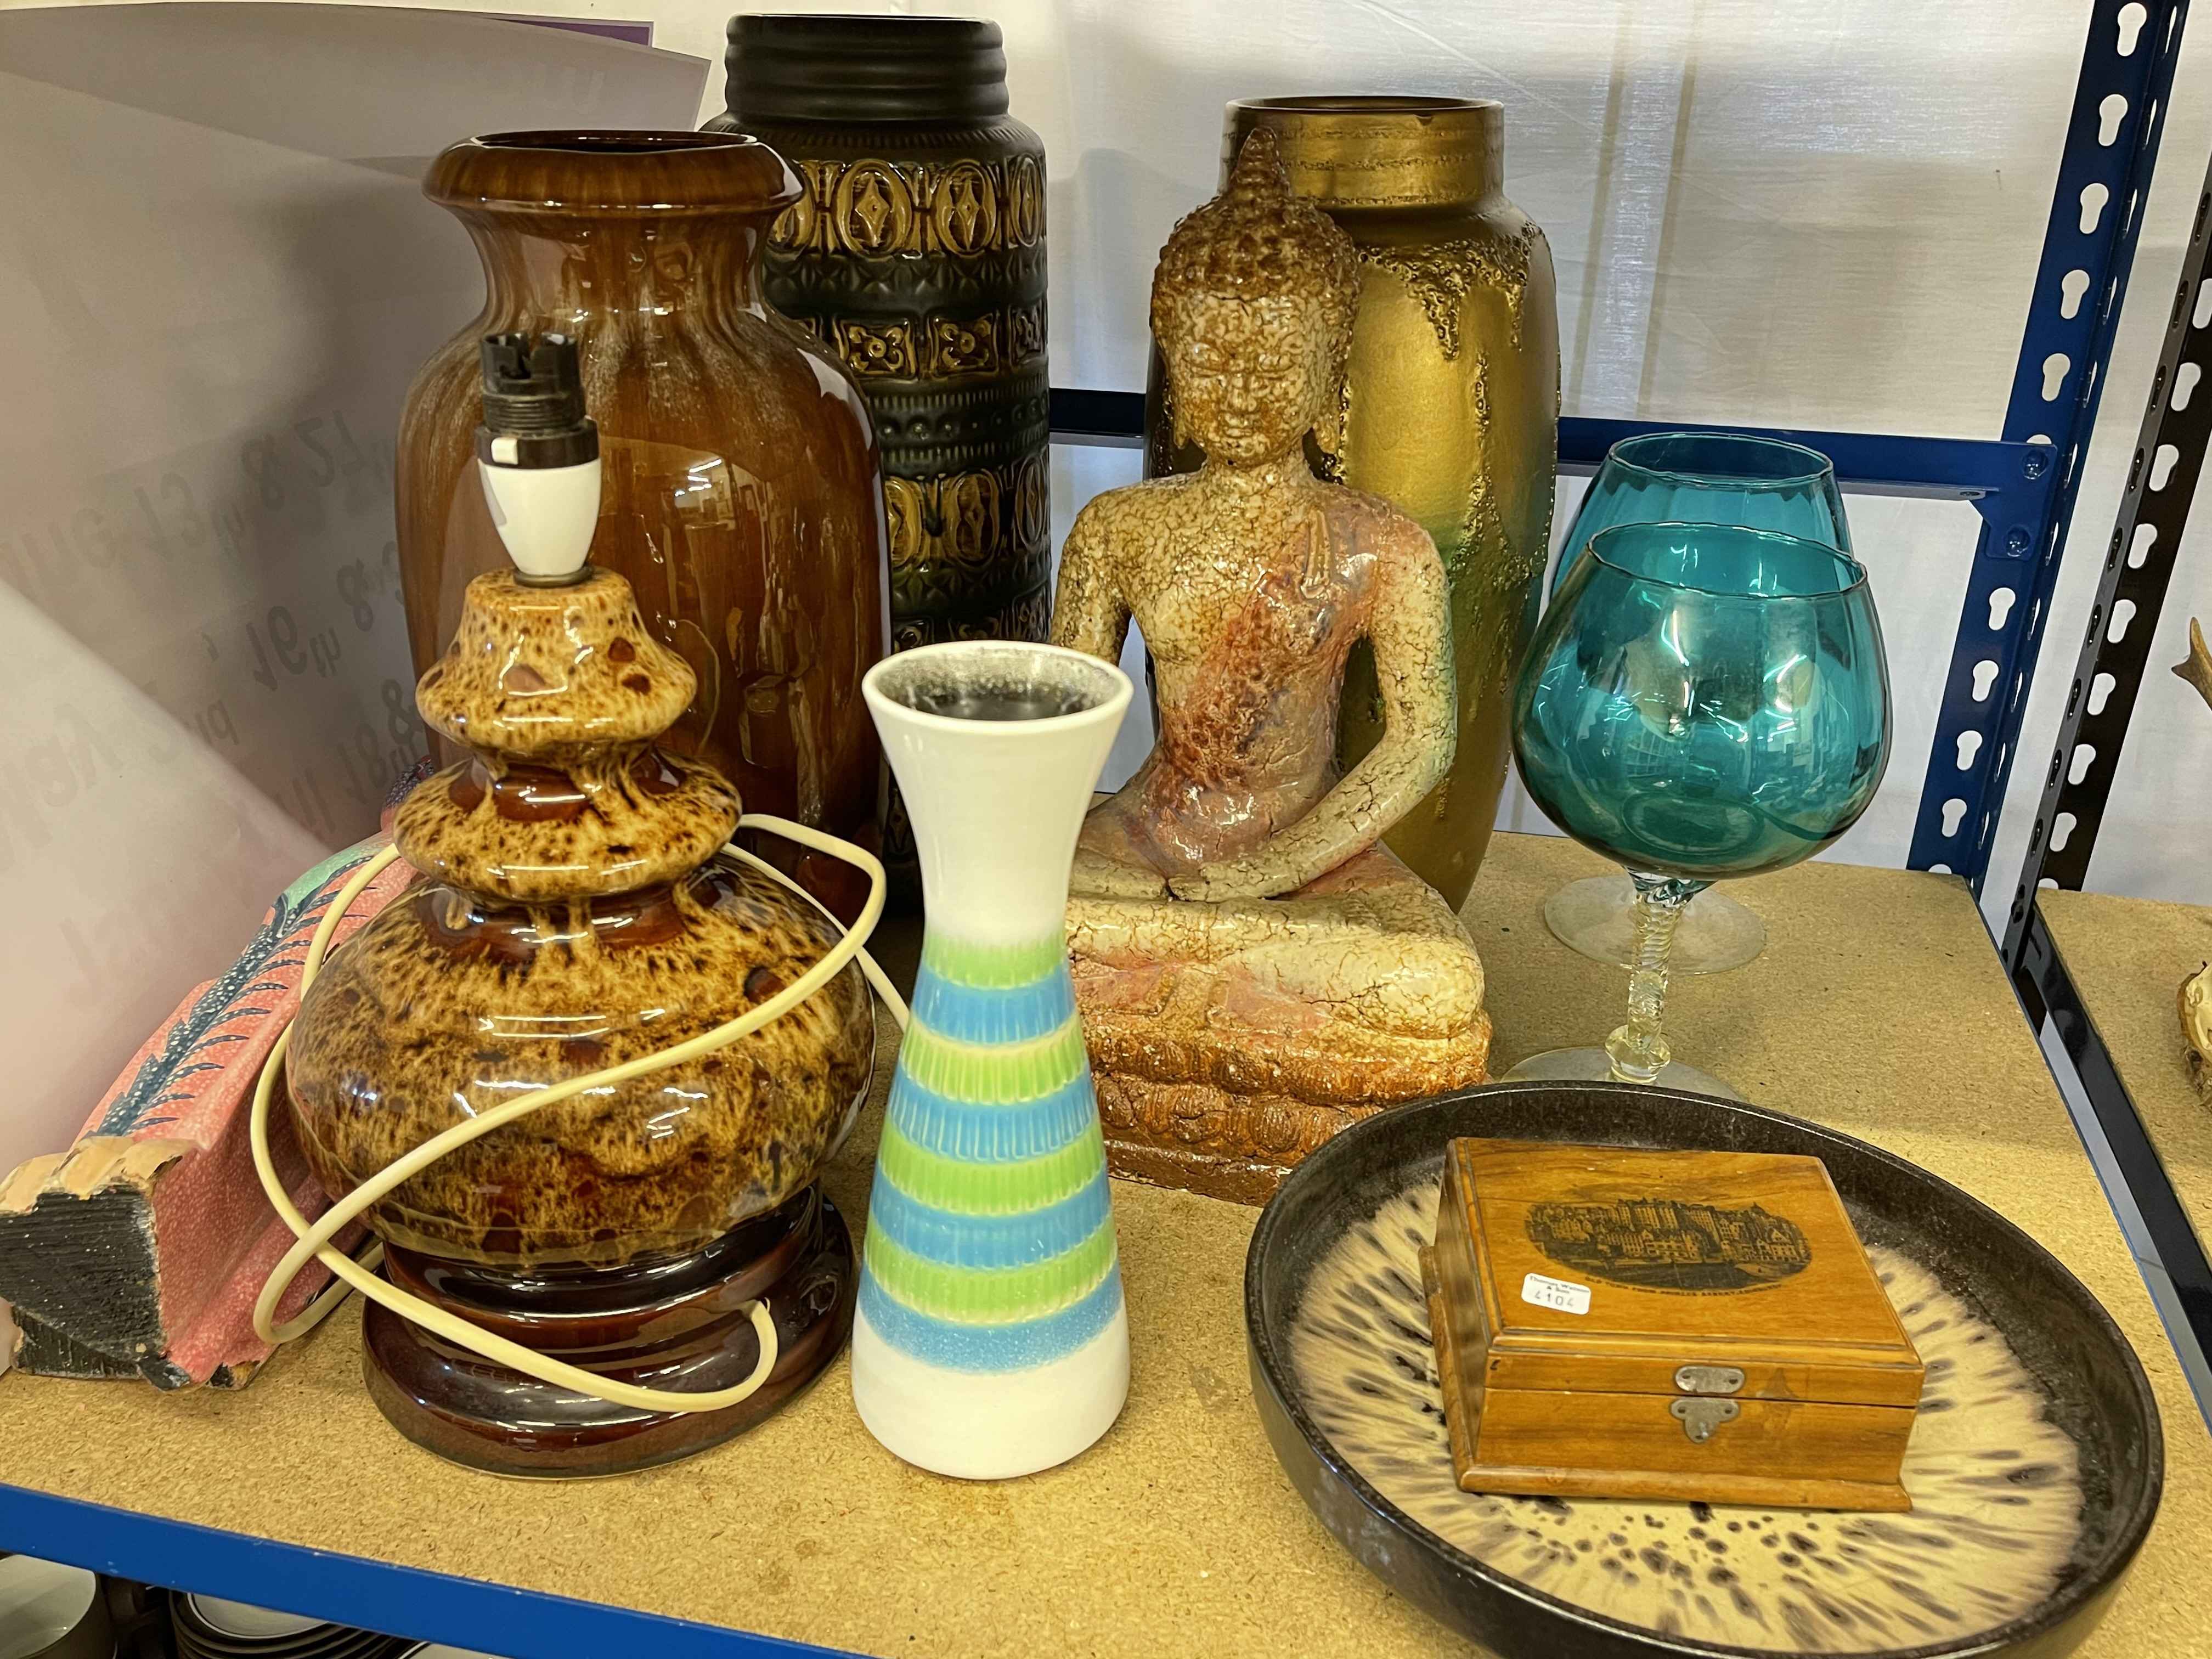 Large W German vases, table lamp, Goddess figure, glass vase, candle holders and goblets,